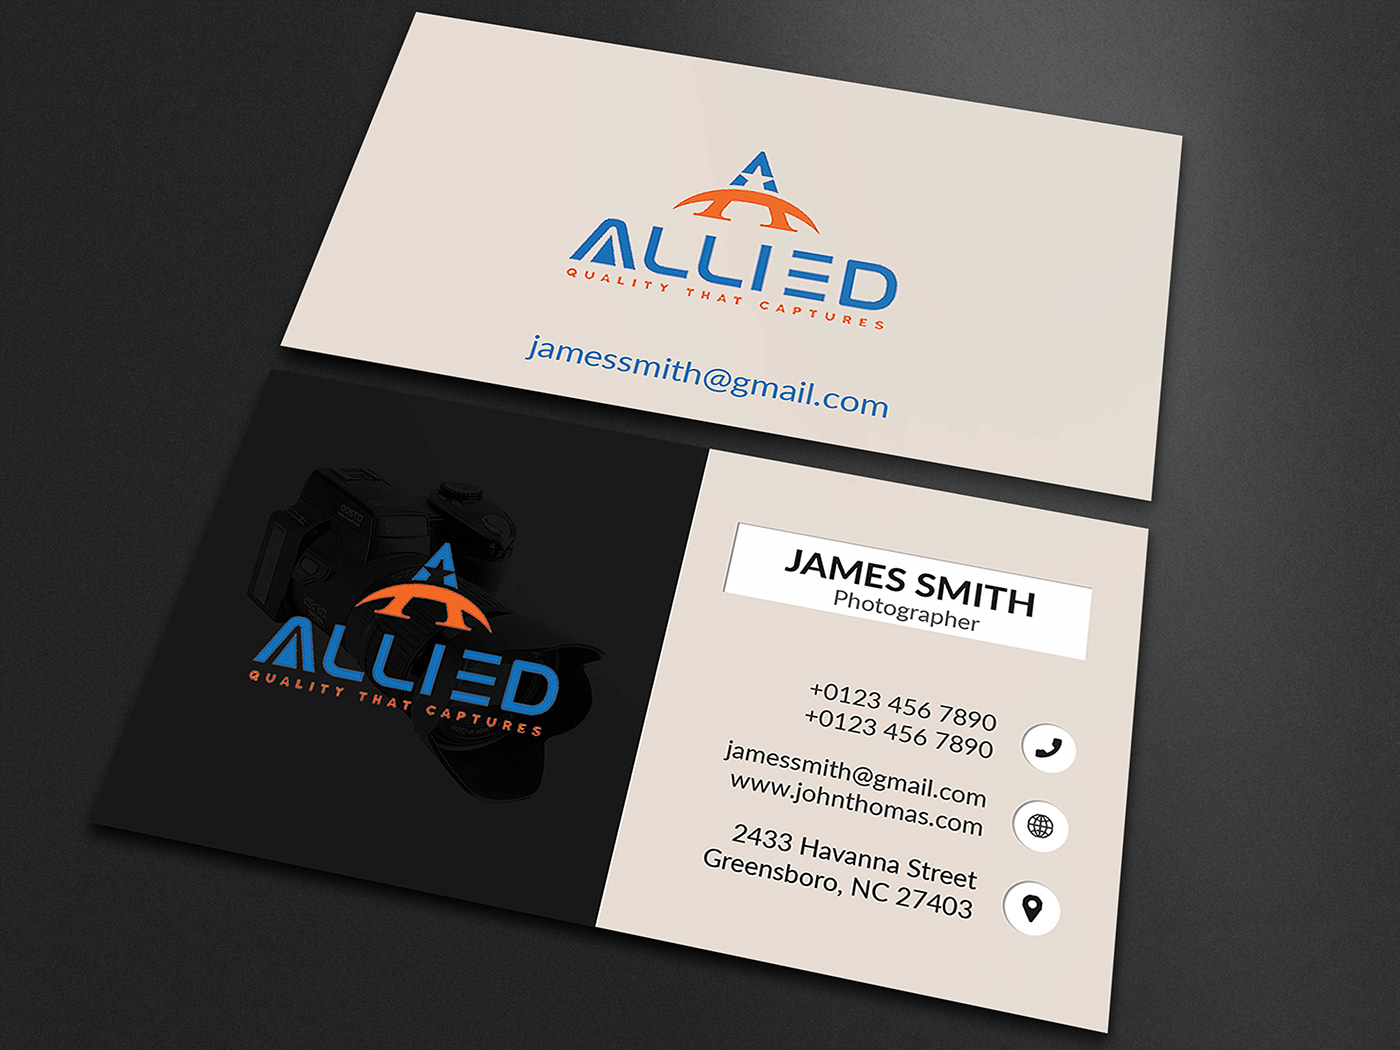 OUTSTANDING PATTERN PRINT PRINT READY PROFESSIONAL business business card DESIGN POSTER BUSINESS Photography  Business Cards design